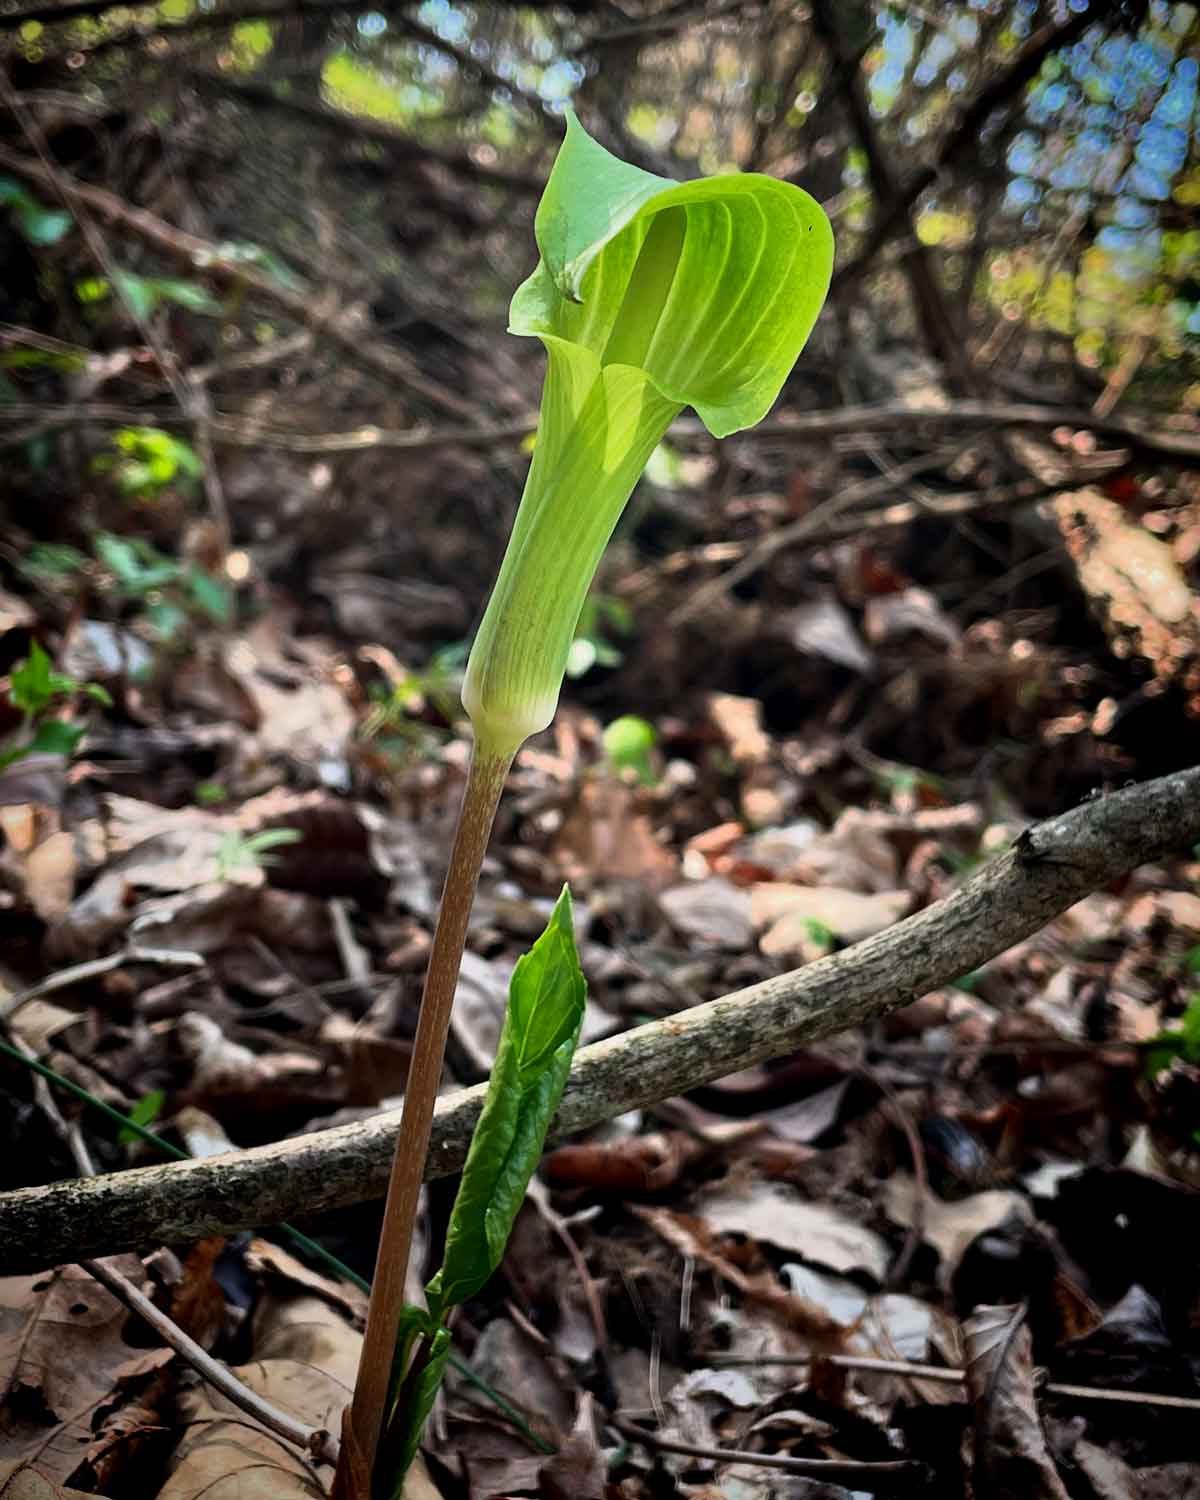 A jack in the pulpit, the first I've noticed so far this season.